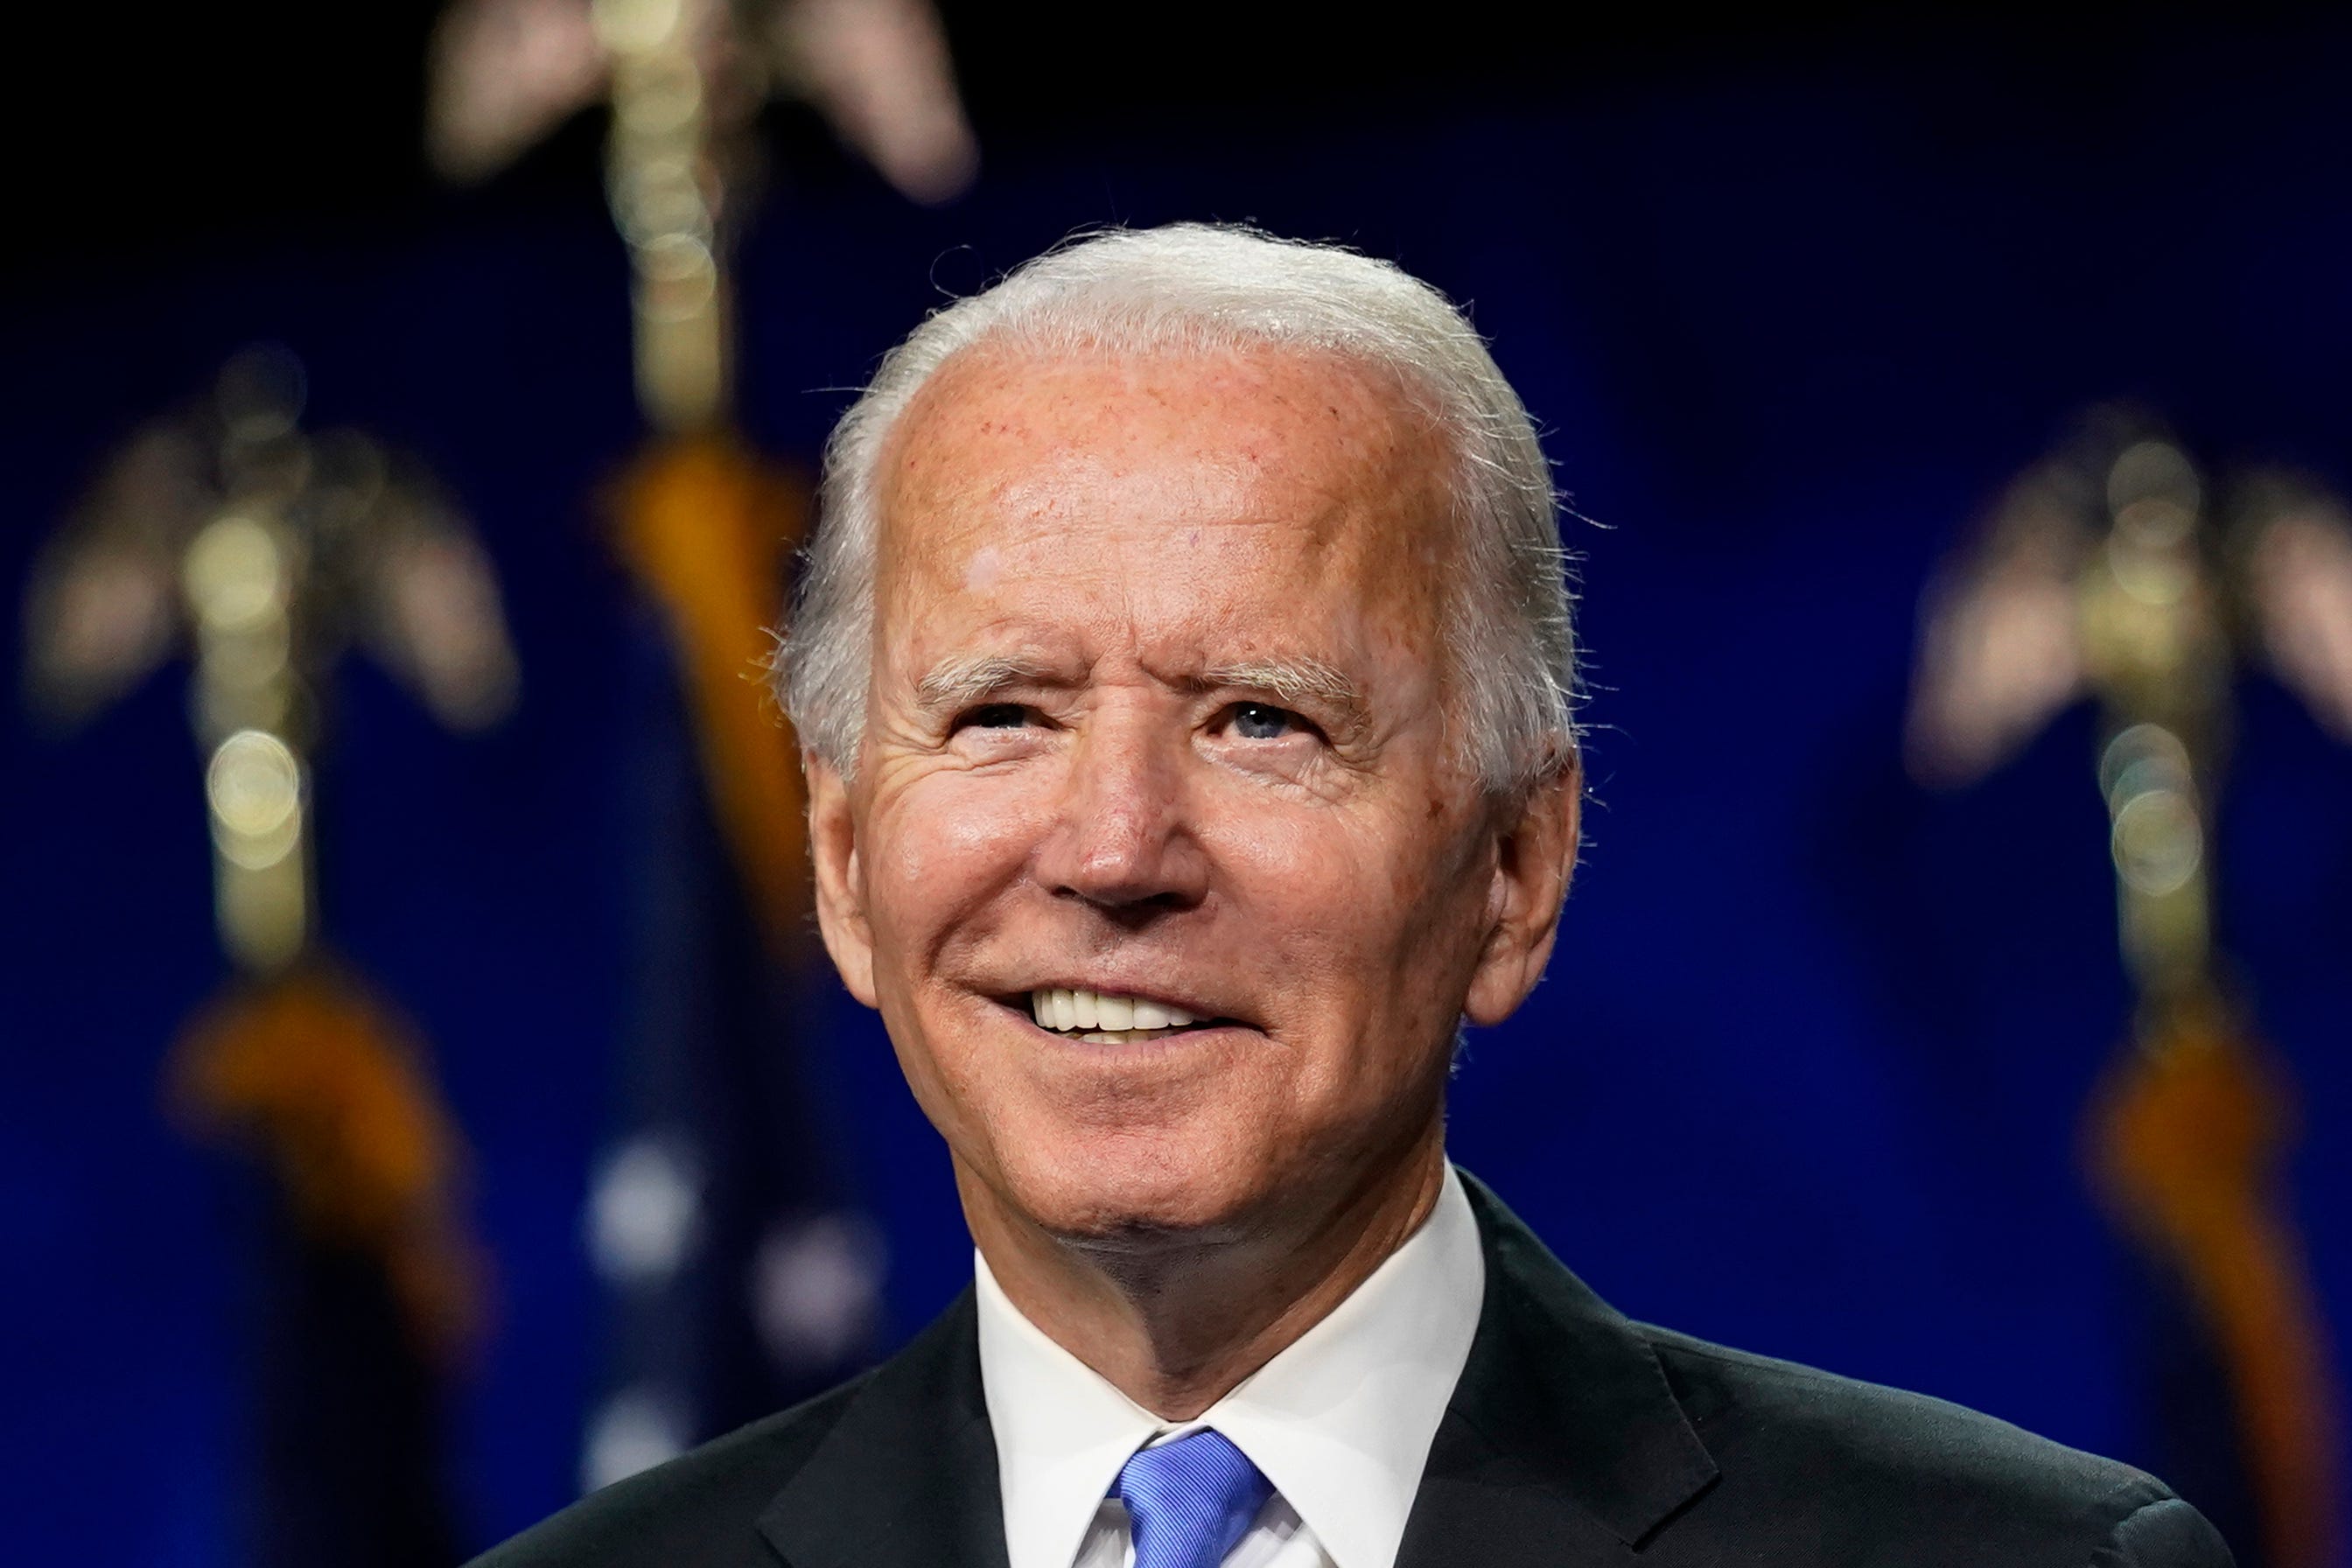 joe biden bernie sanders and trumps age - Biden|President|Joe|States|Delaware|Obama|Vice|Senate|Campaign|Election|Time|Administration|House|Law|People|Years|Family|Year|Trump|School|University|Senator|Office|Party|Country|Committee|Act|War|Days|Climate|Hunter|Health|America|State|Day|Democrats|Americans|Documents|Care|Plan|United States|Vice President|White House|Joe Biden|Biden Administration|Democratic Party|Law School|Presidential Election|President Joe Biden|Executive Orders|Foreign Relations Committee|Presidential Campaign|Second Term|47Th Vice President|Syracuse University|Climate Change|Hillary Clinton|Last Year|Barack Obama|Joseph Robinette Biden|U.S. Senator|Health Care|U.S. Senate|Donald Trump|President Trump|President Biden|Federal Register|Judiciary Committee|Presidential Nomination|Presidential Medal